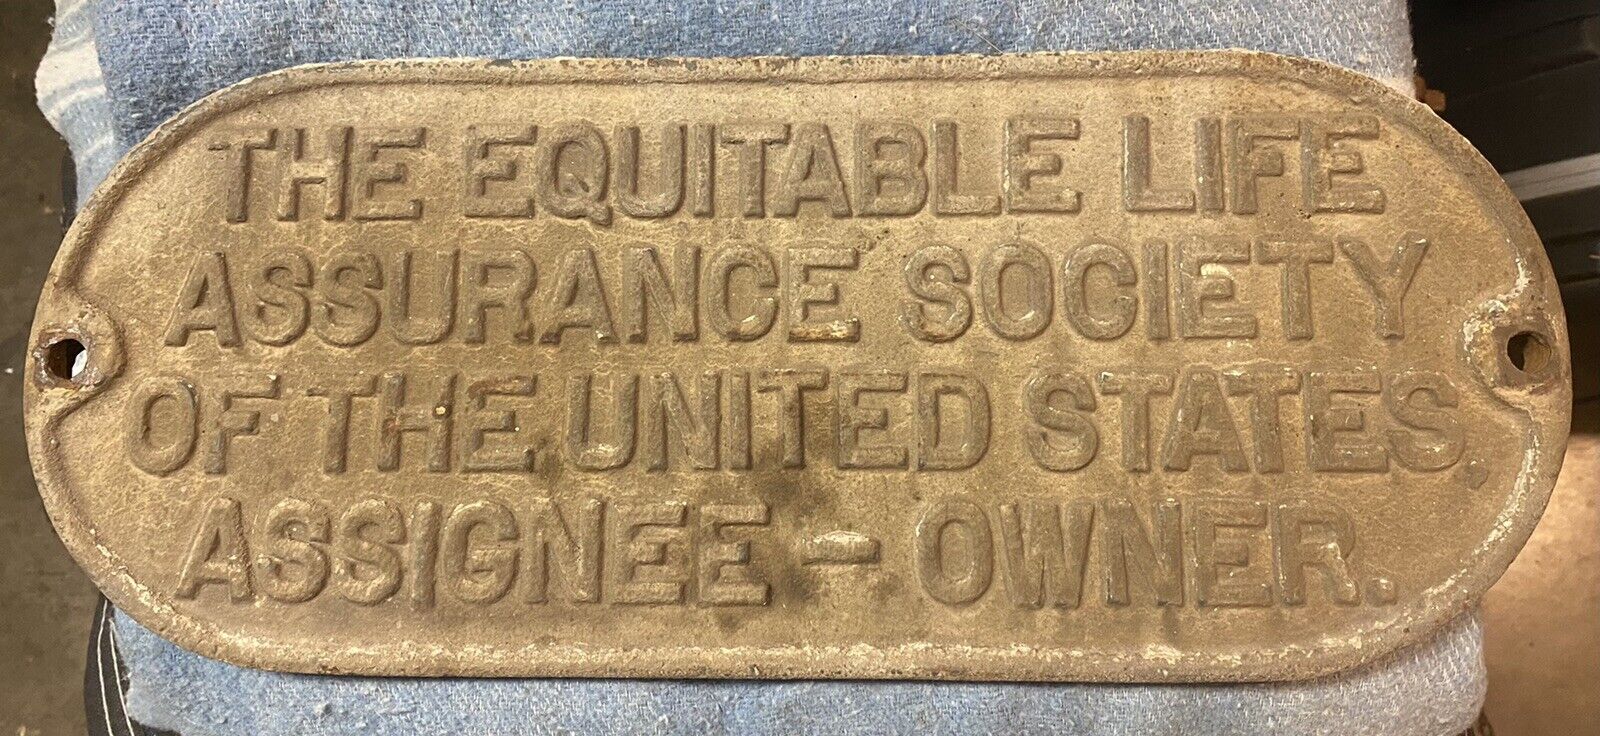 Equitable Life Assurance Society of U.S. Cast Iron Building Marker 17x7